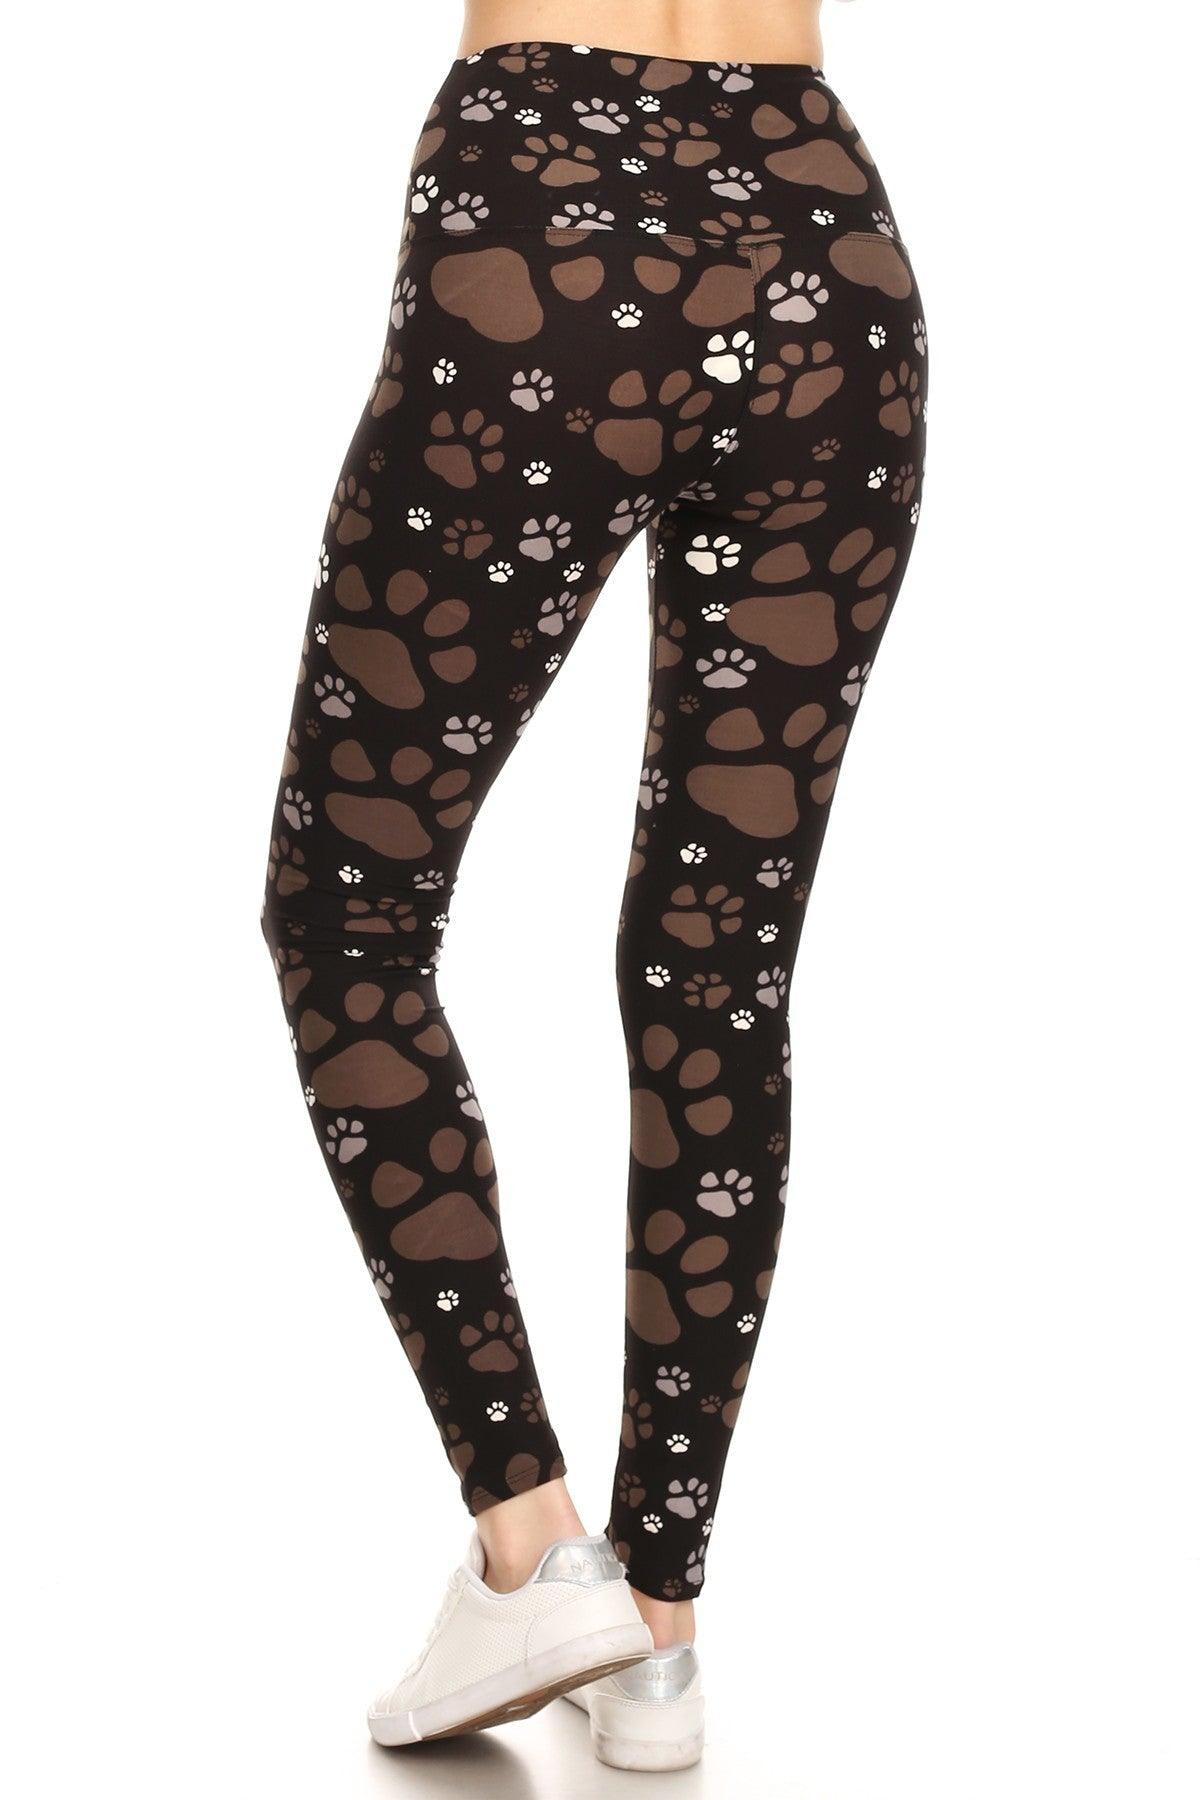 5-inch Long Yoga Style Banded Lined Paw Printed Knit Legging With High Waist - Boutique Fashionistah